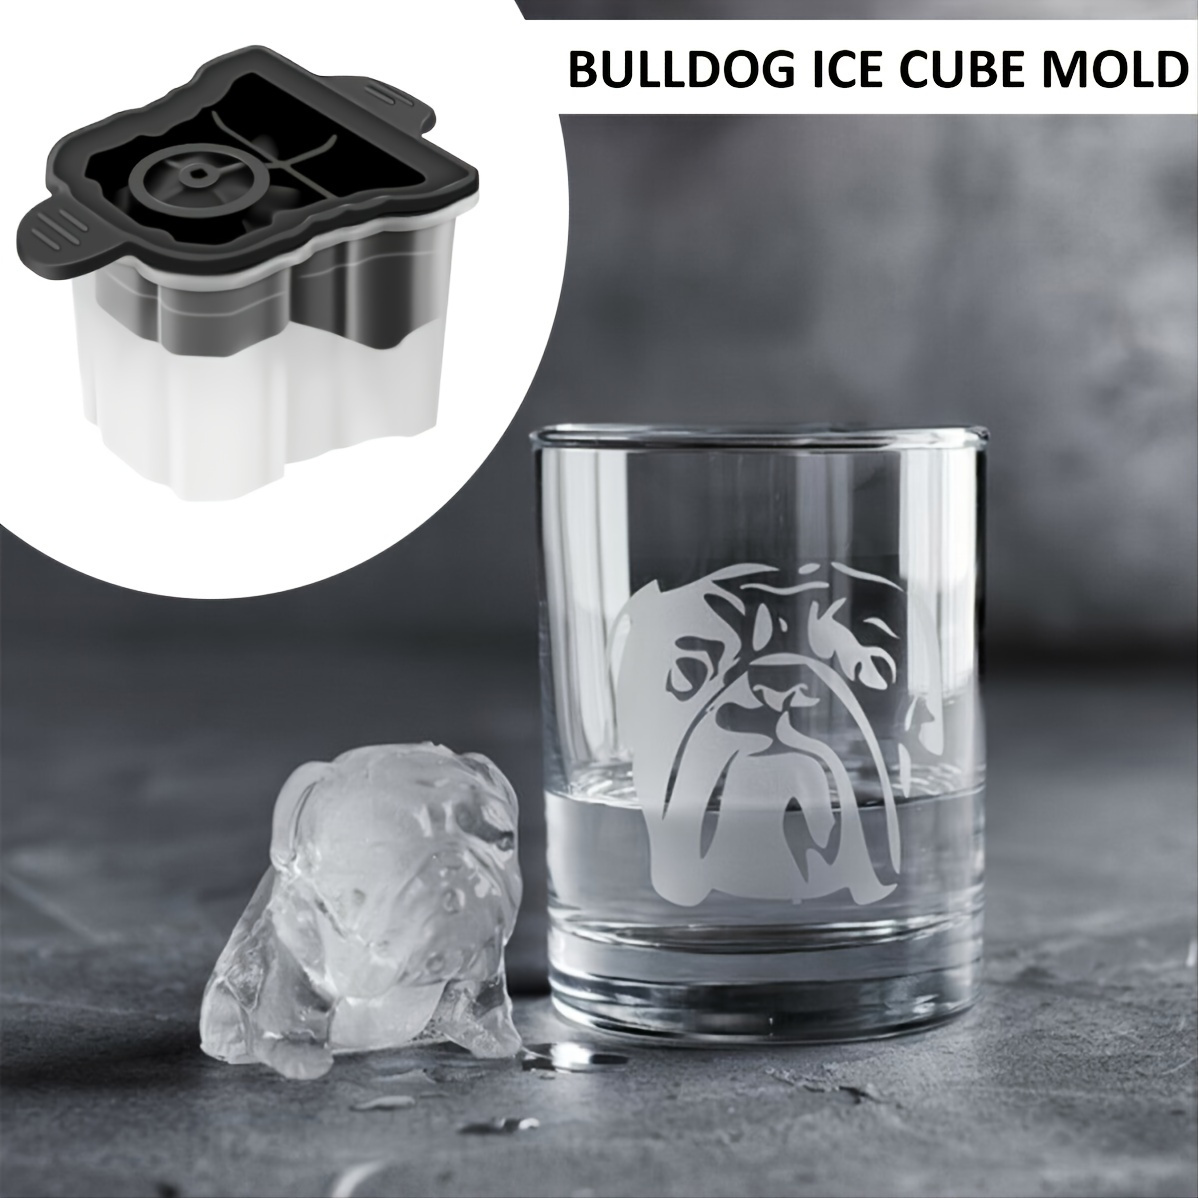 Cheap PDTO Ice Mold Bulldog Ice Silicone Moulds for Whiskey